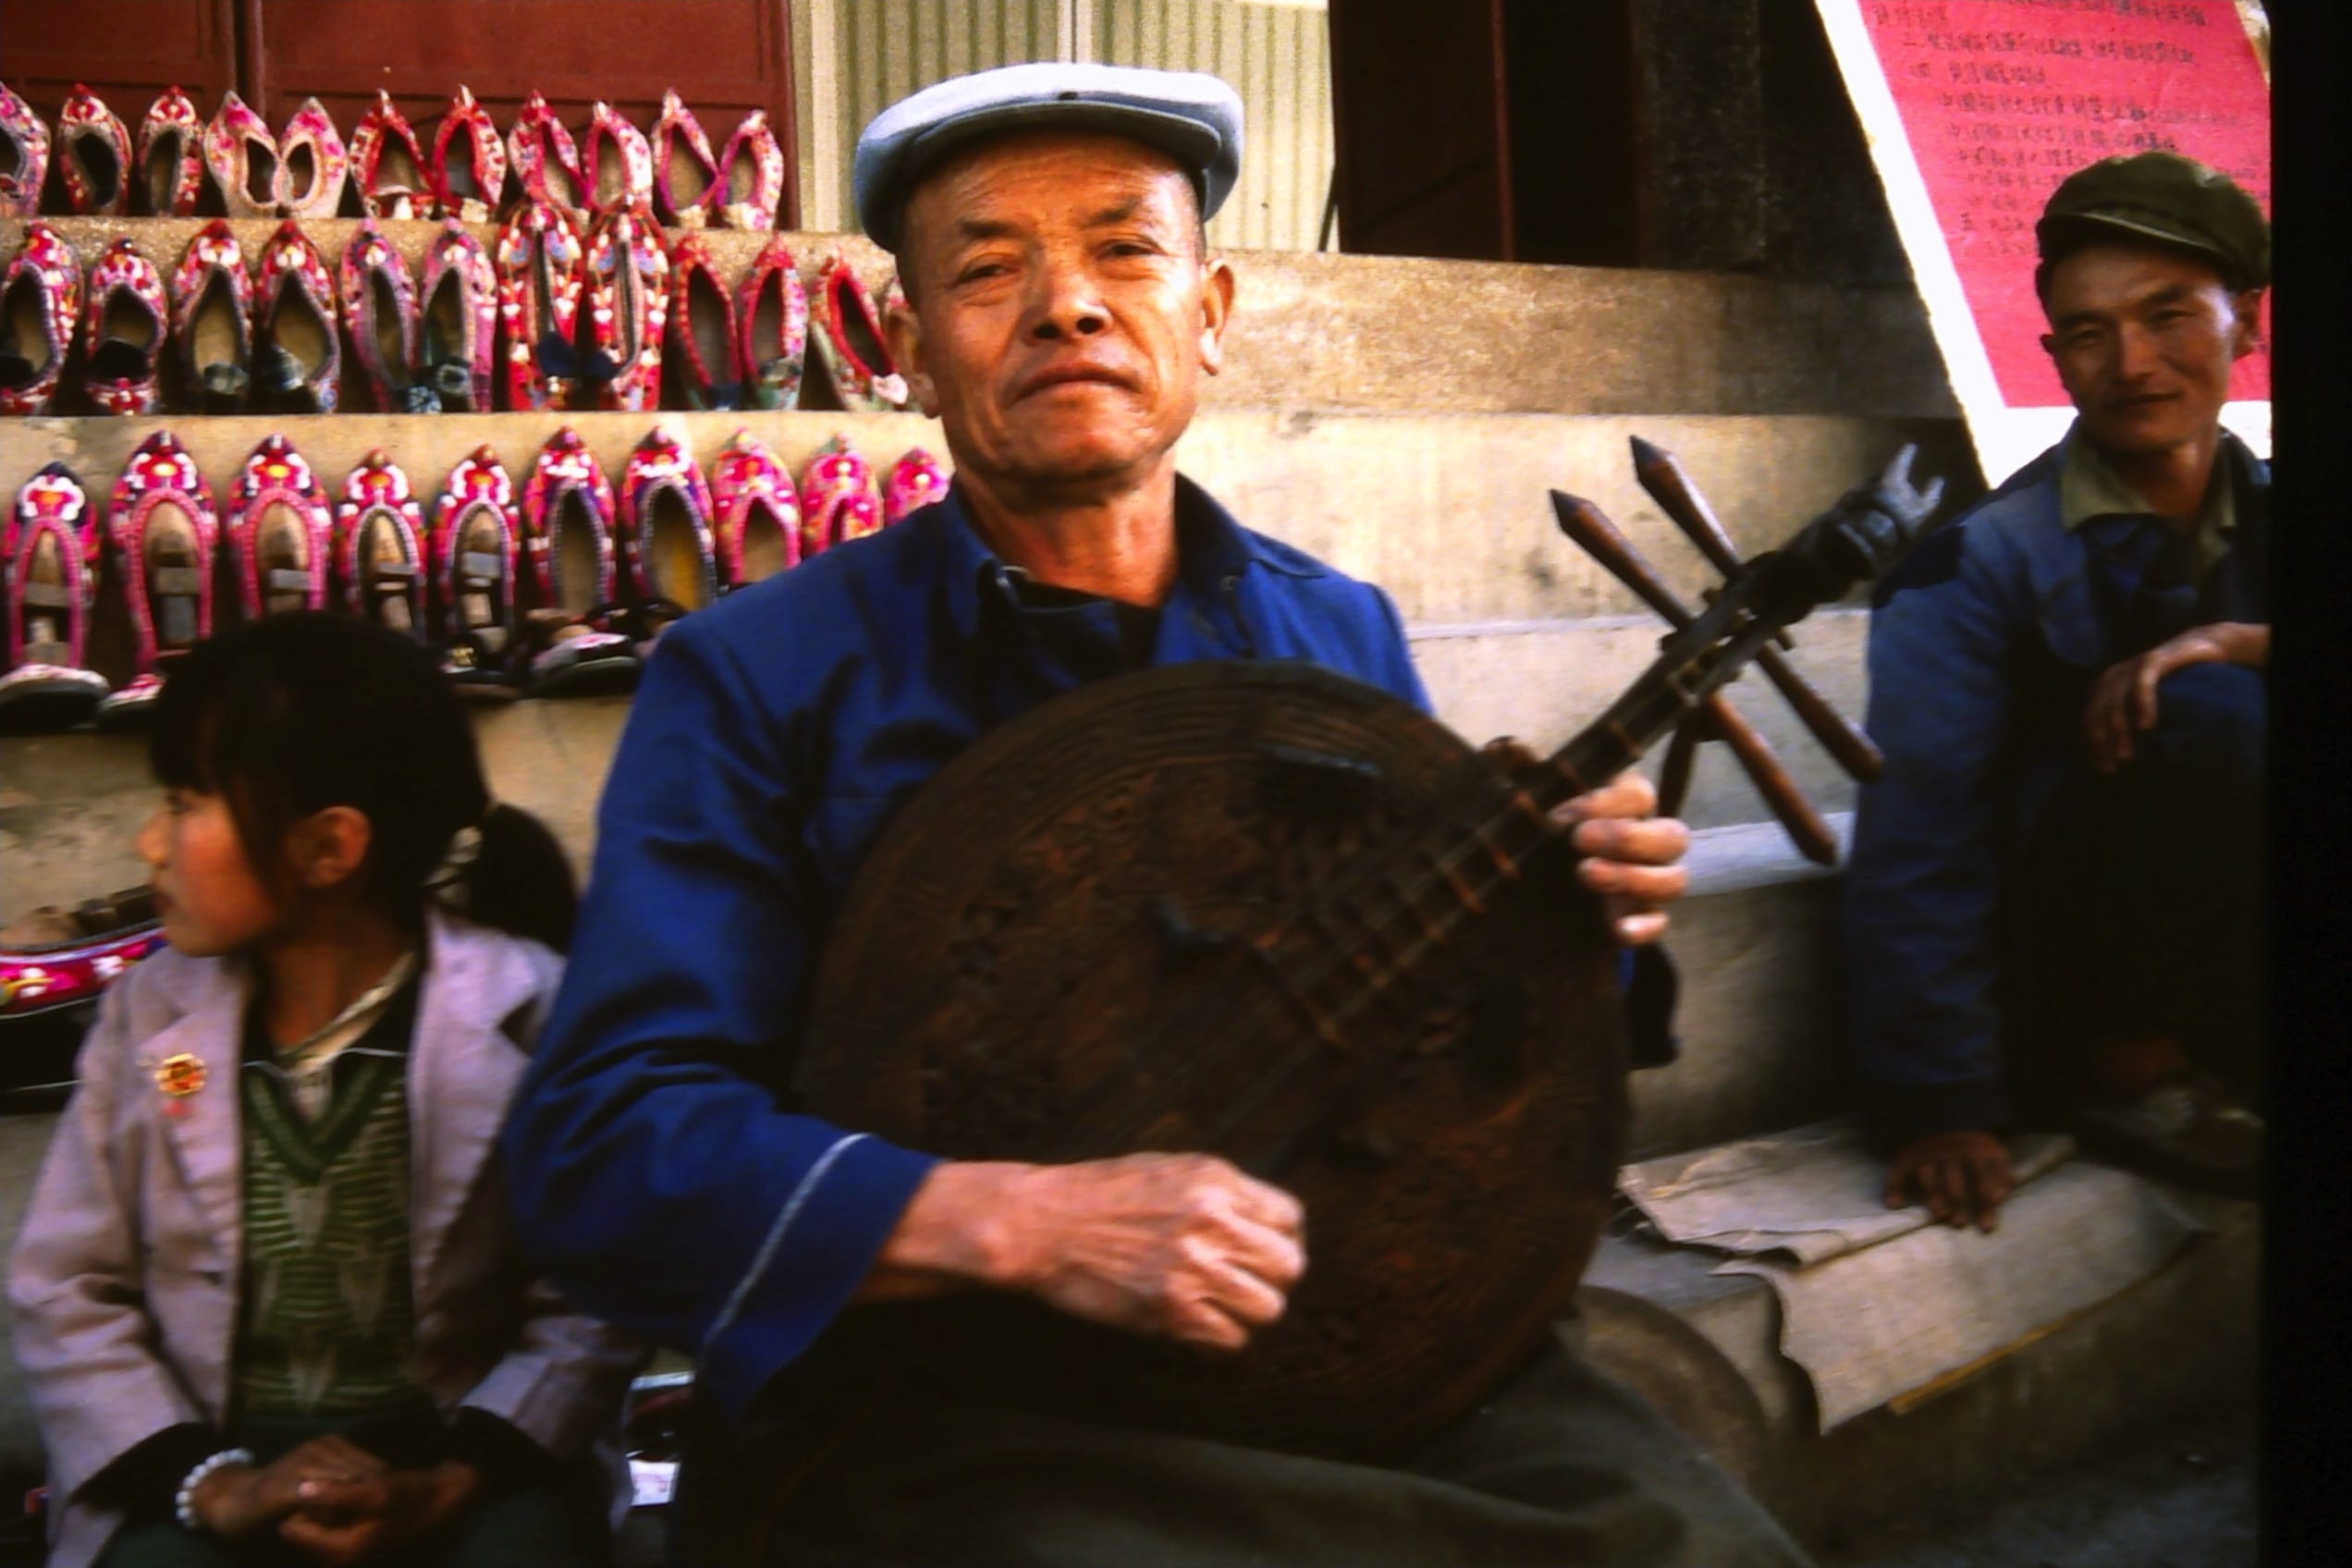 Shoe seller proudly holding his home made string instrument.